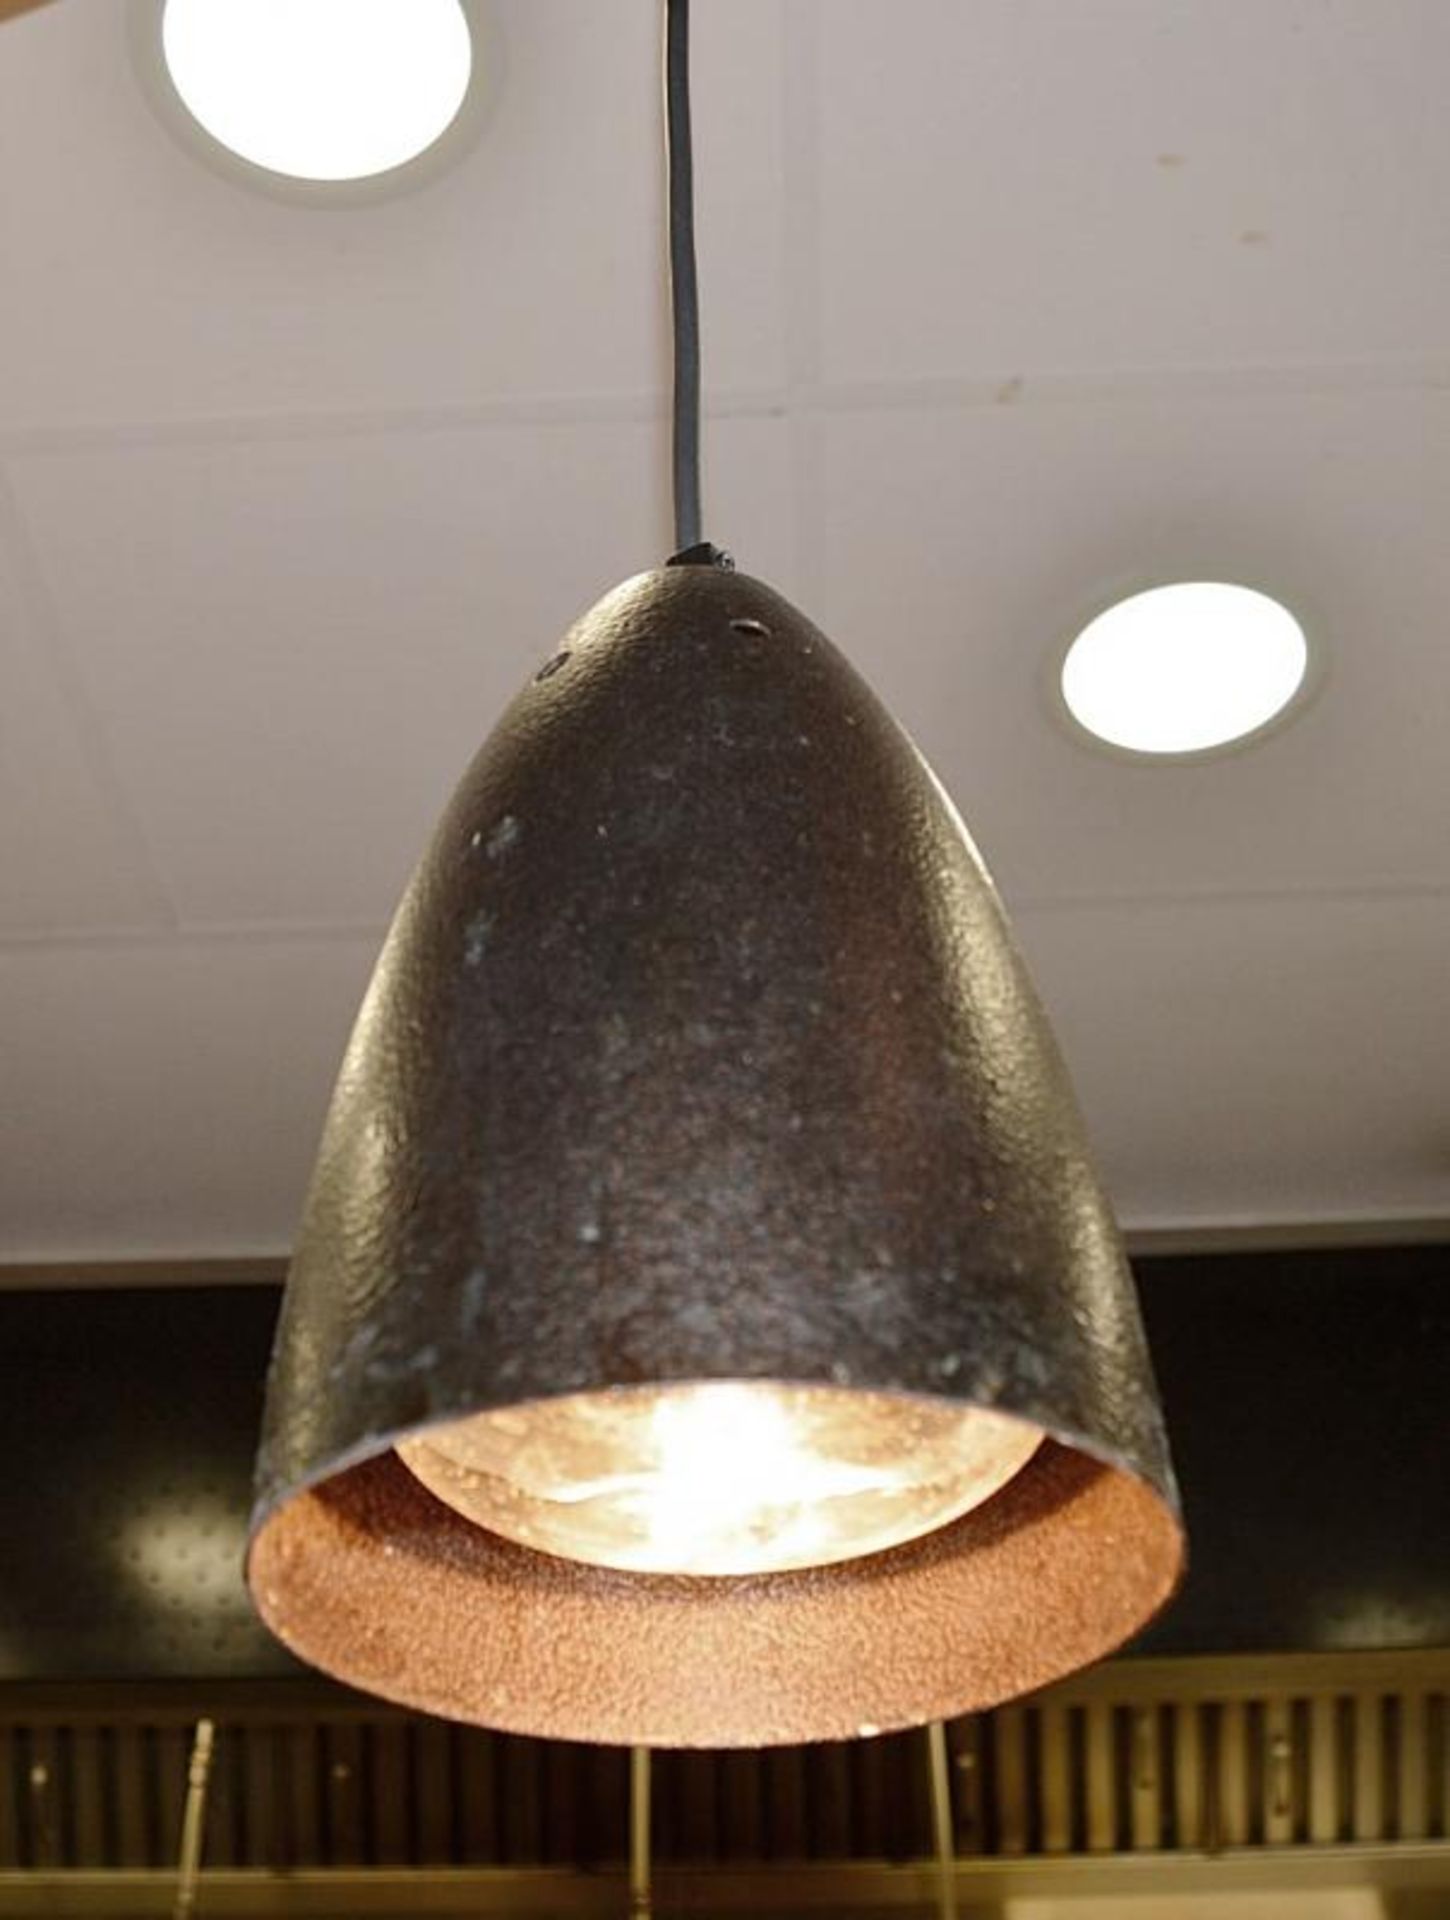 7 x Commercial Food Warming Heat Lamps With Curved Holding Rail - CL366 - Ref BB1085 - Location: Mil - Image 2 of 6